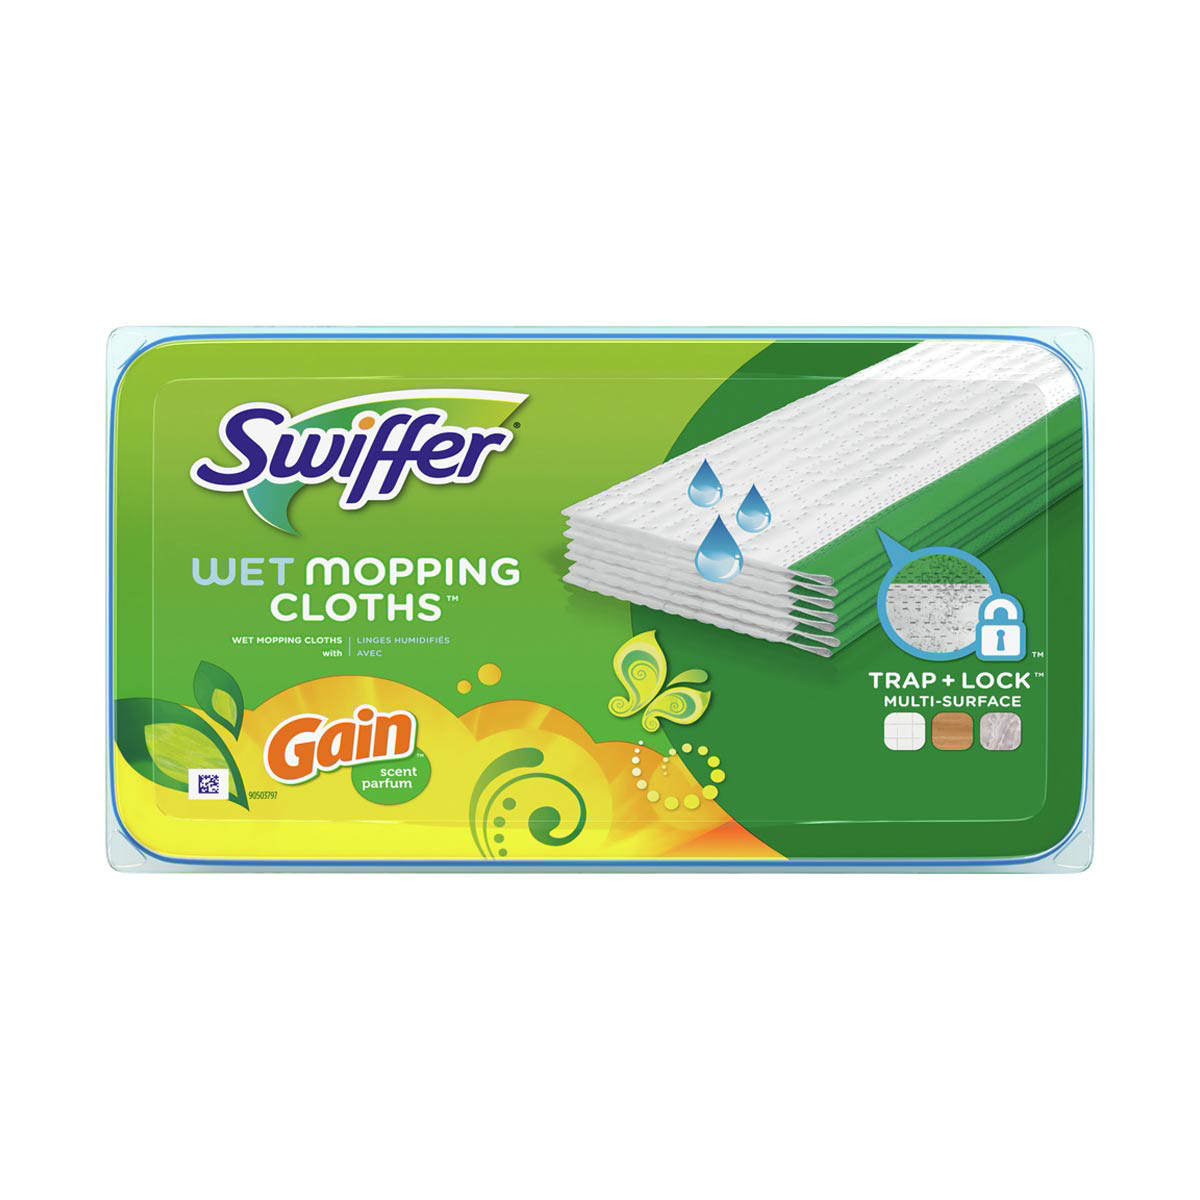 Box of 37 Swiffer Dry Sweeping Cloths - Gain Scented - 8.0 x 10.4 - NEW